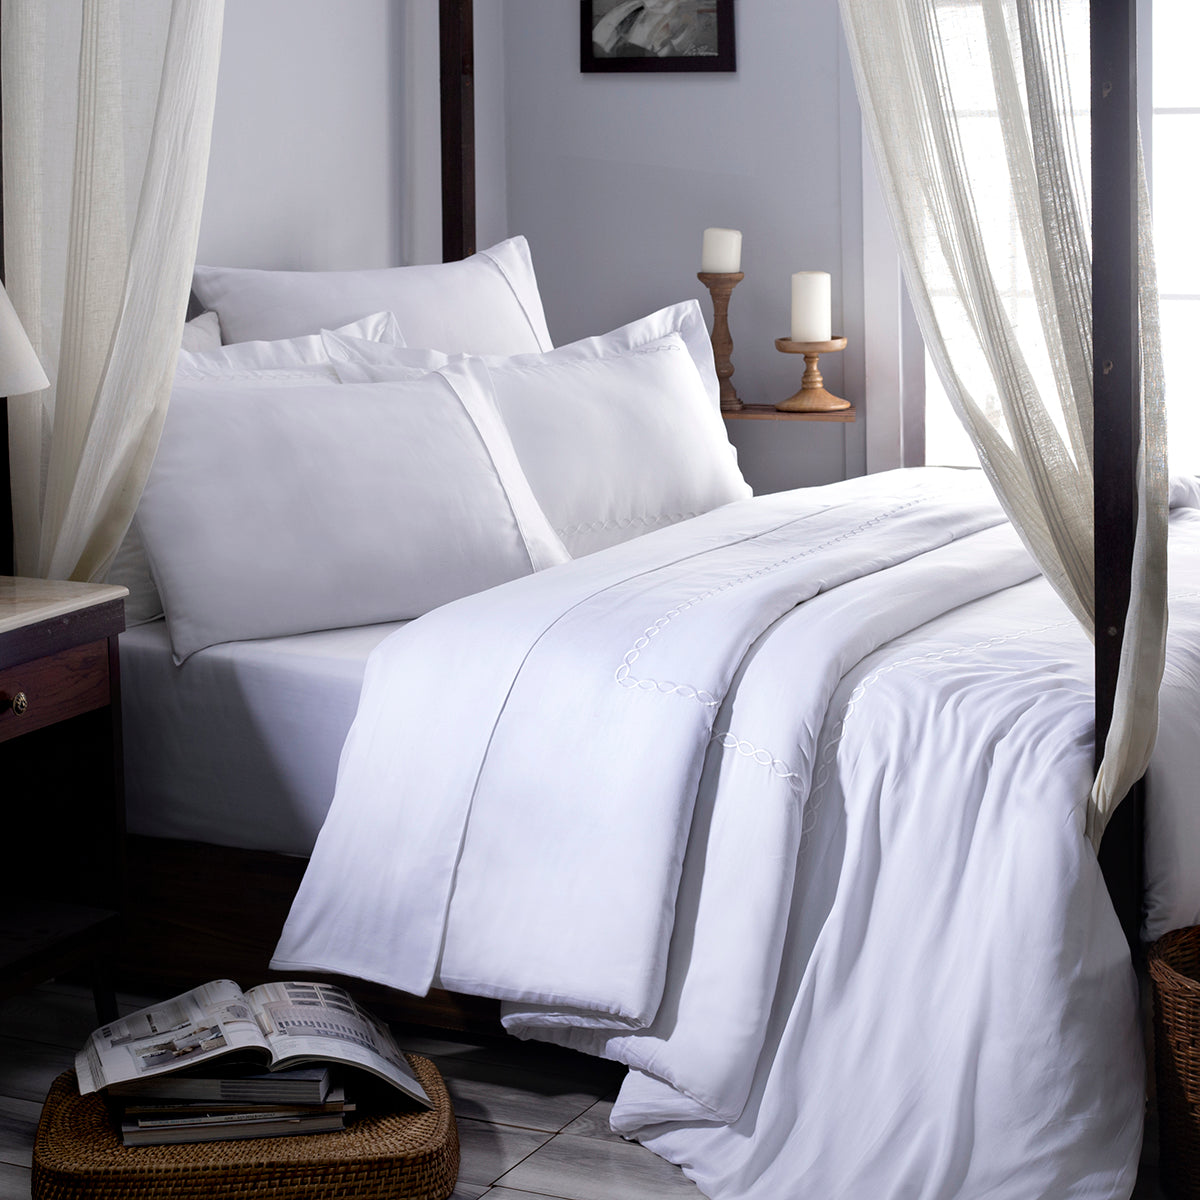 Luxe Leisure Chain Stitch Embroidery 100% Cotton Super Soft White Duvet Cover with Pillow Case